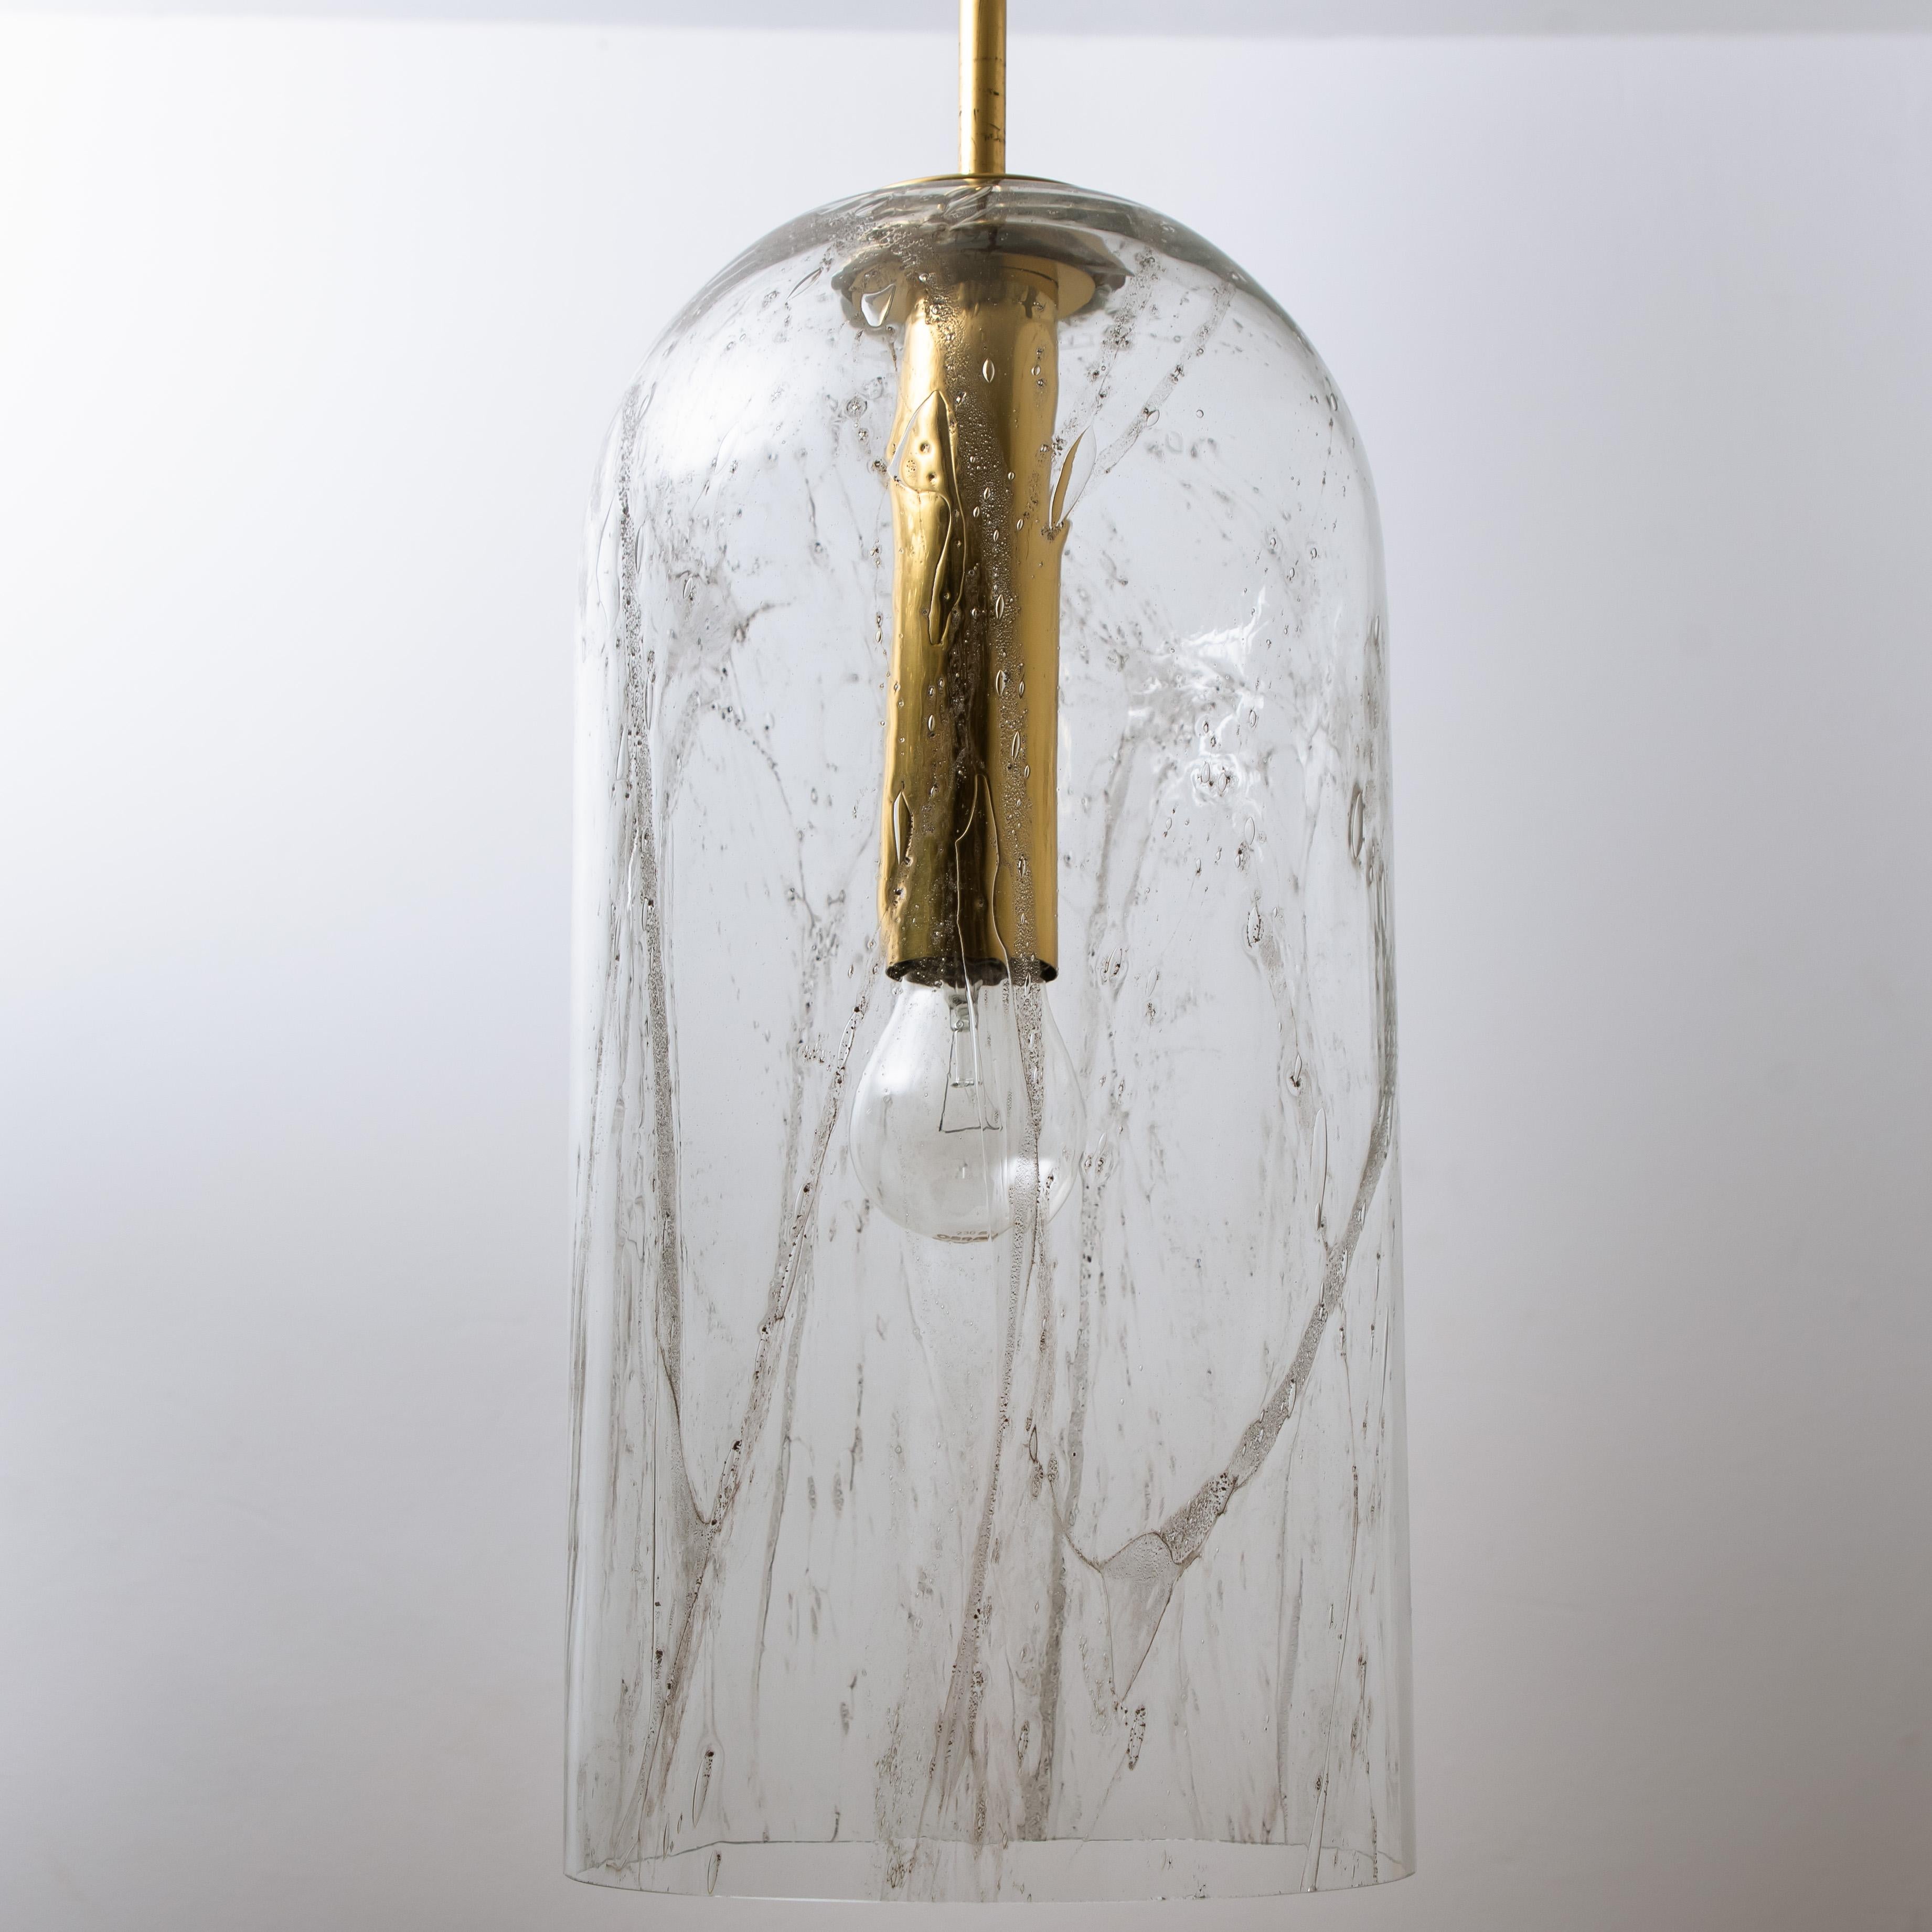 One of three beautiful bubble glass pendant Lights designed by Doria. High-end pieces from the midcentury. A design Classic, the textured hand blown glass gives a wonderful warm glow. 

The dimensions: Height from ceiling 59.05 (150 cm), The